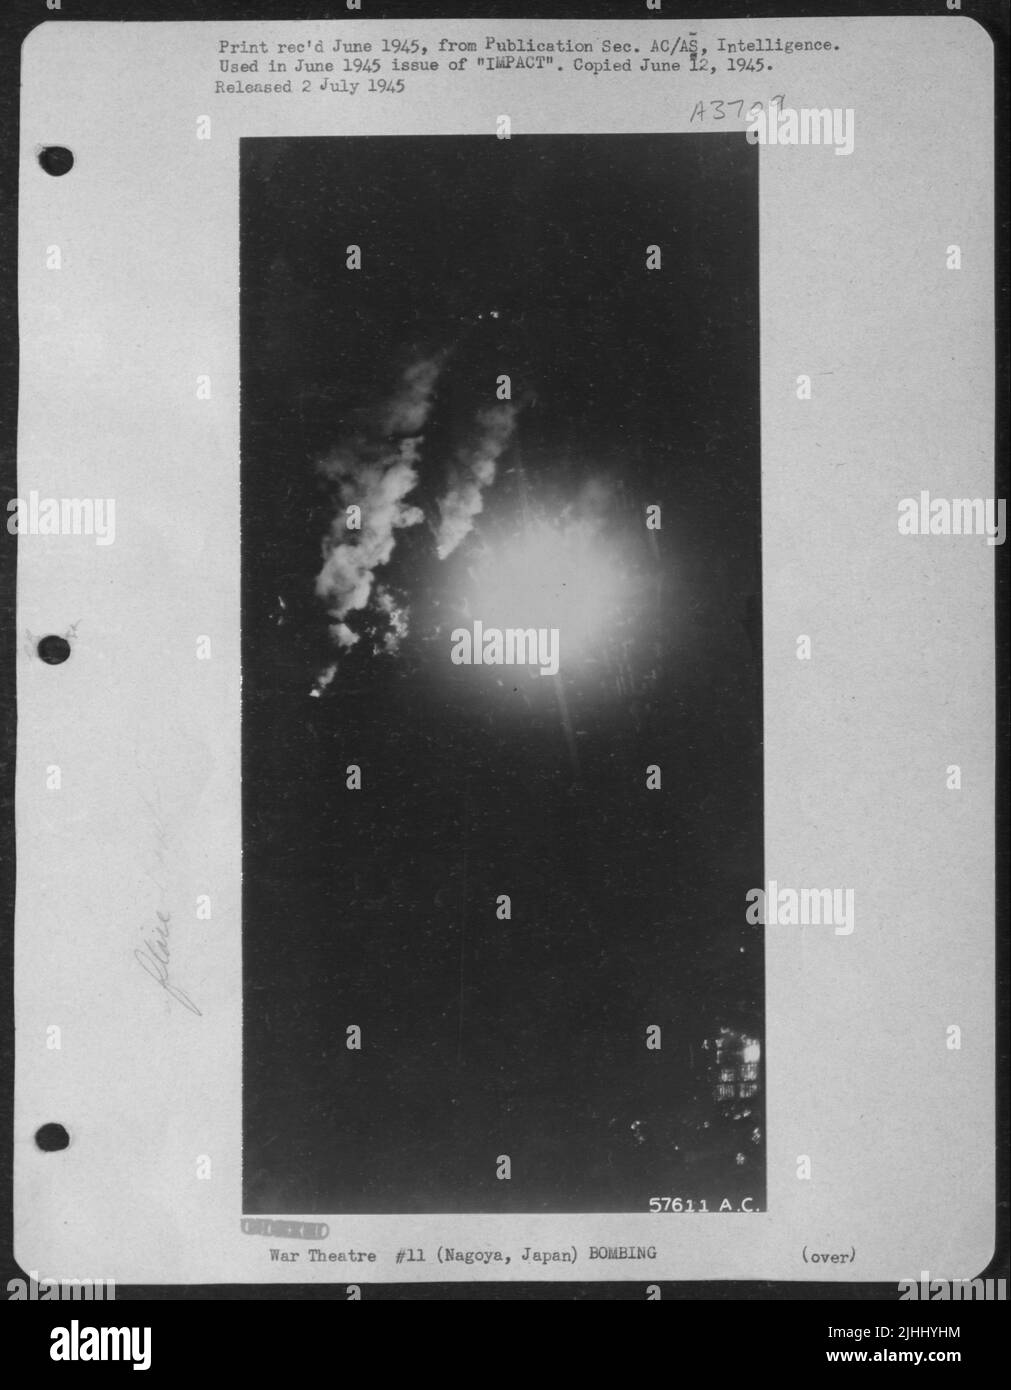 Flare Bomb Reflecting On Smoke Plumes, Made This Ghostly Photo Taken During Nagoya, Japanese Night Attack, 25 March 1945. Stock Photo